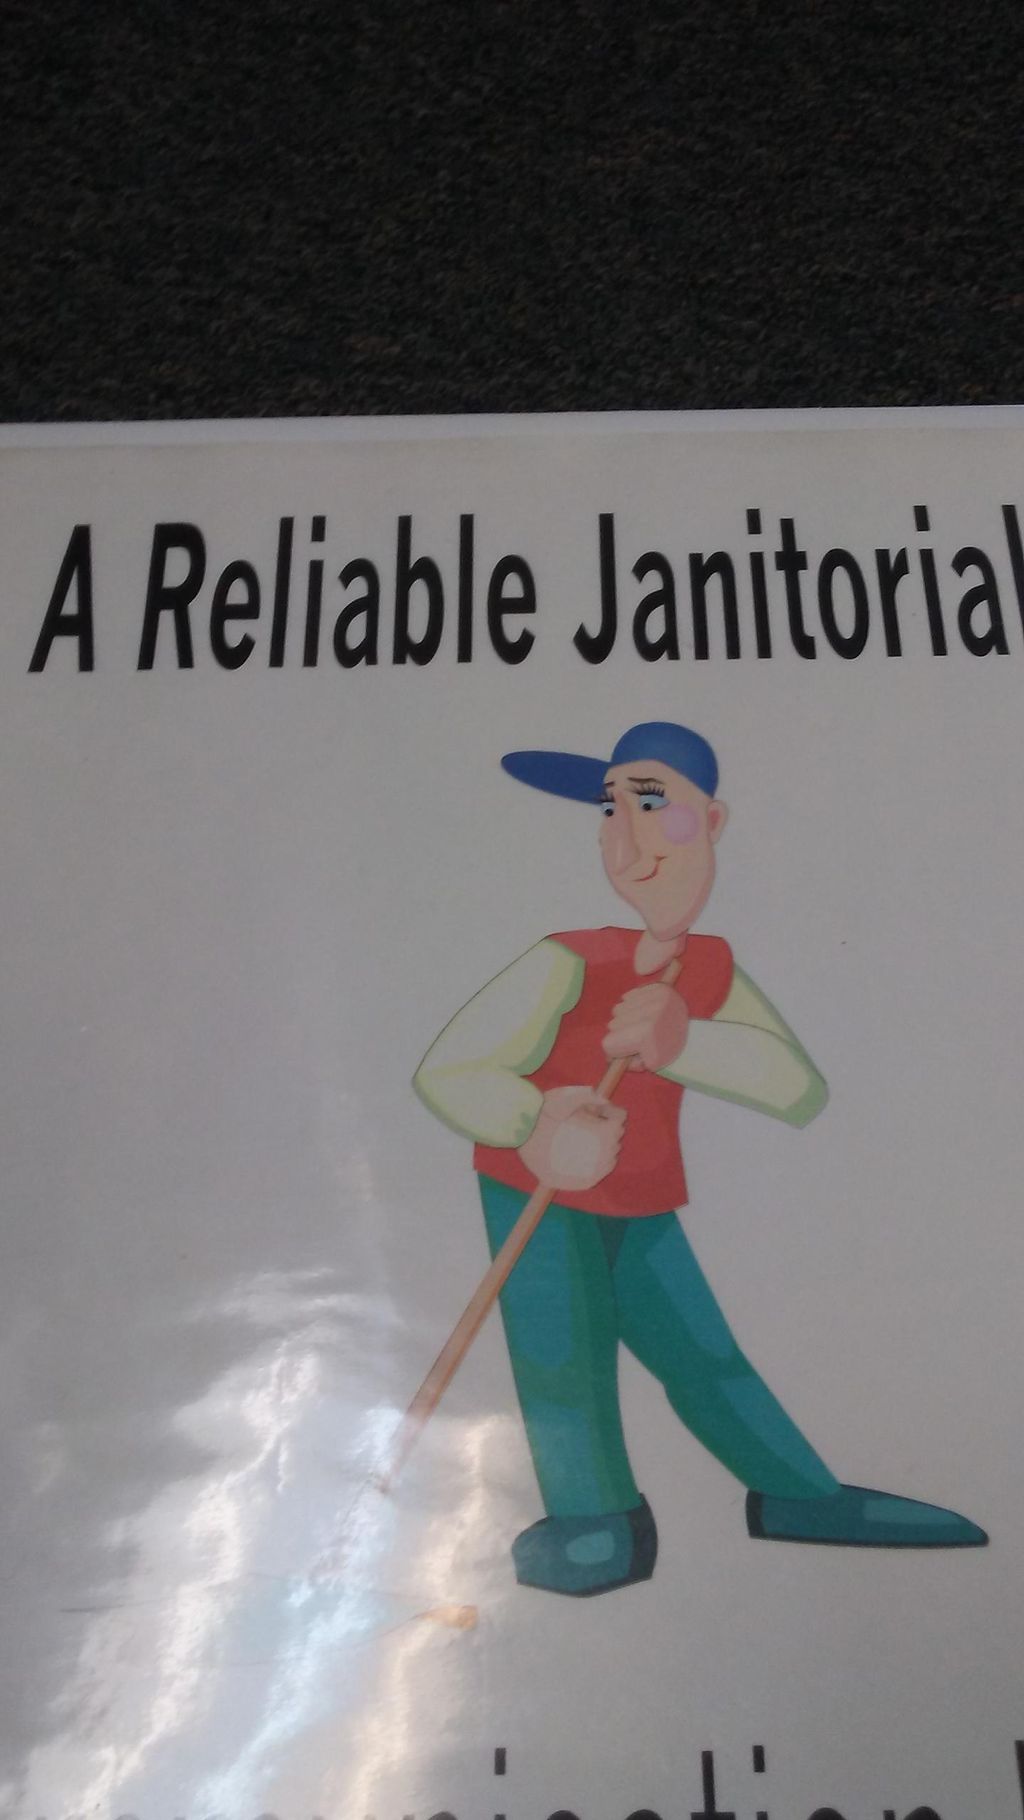 A Reliable Janitorial